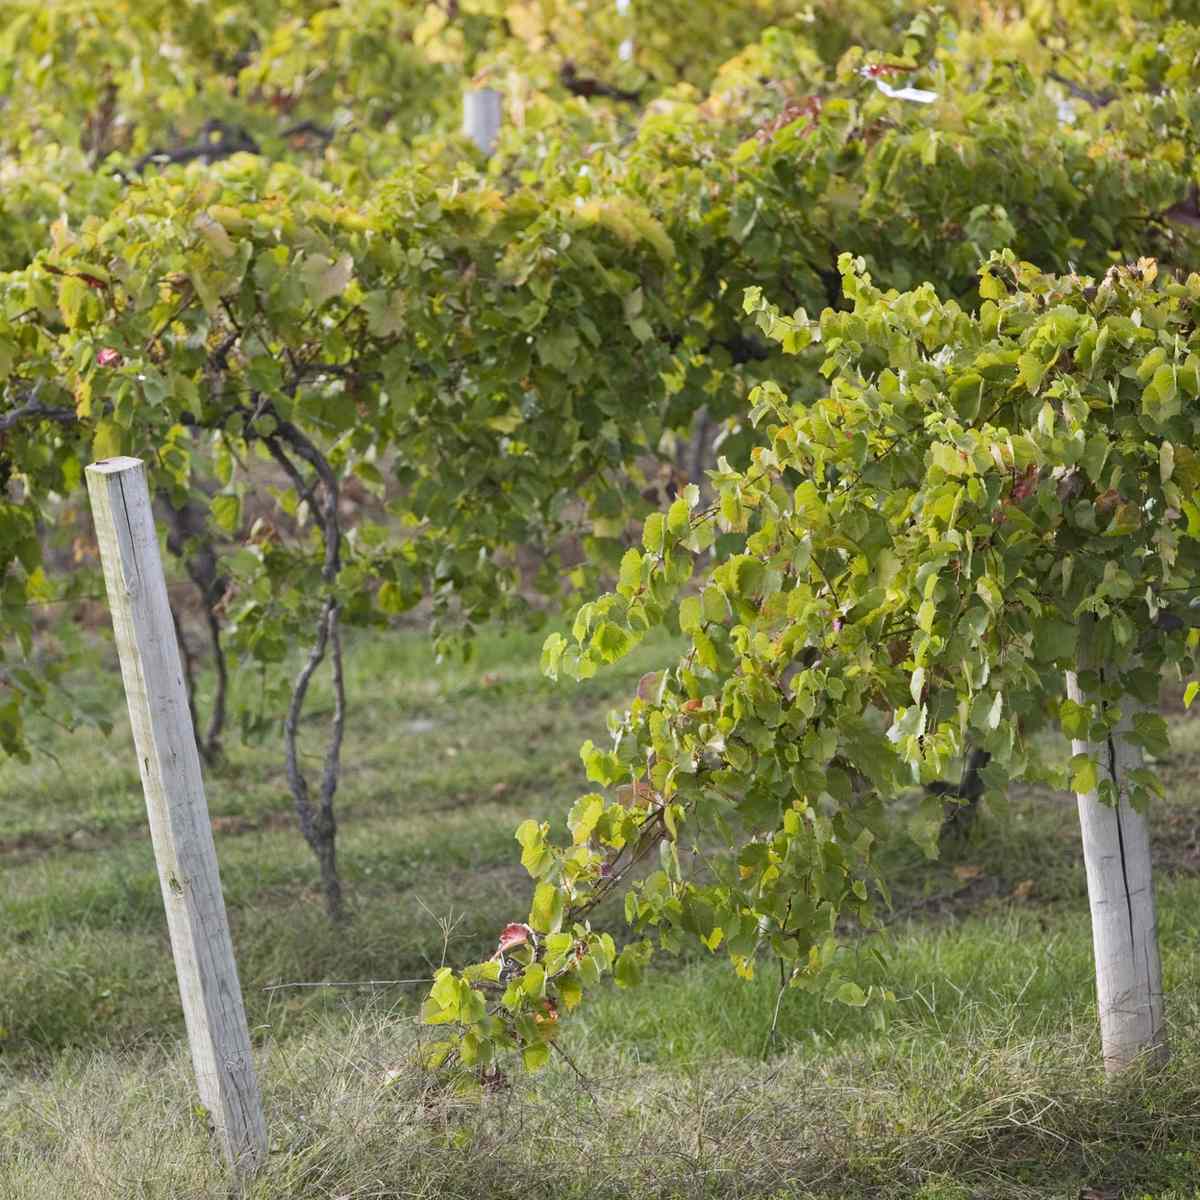 FWX THE HISTORY OF AMERICAS OLDEST GRAPE